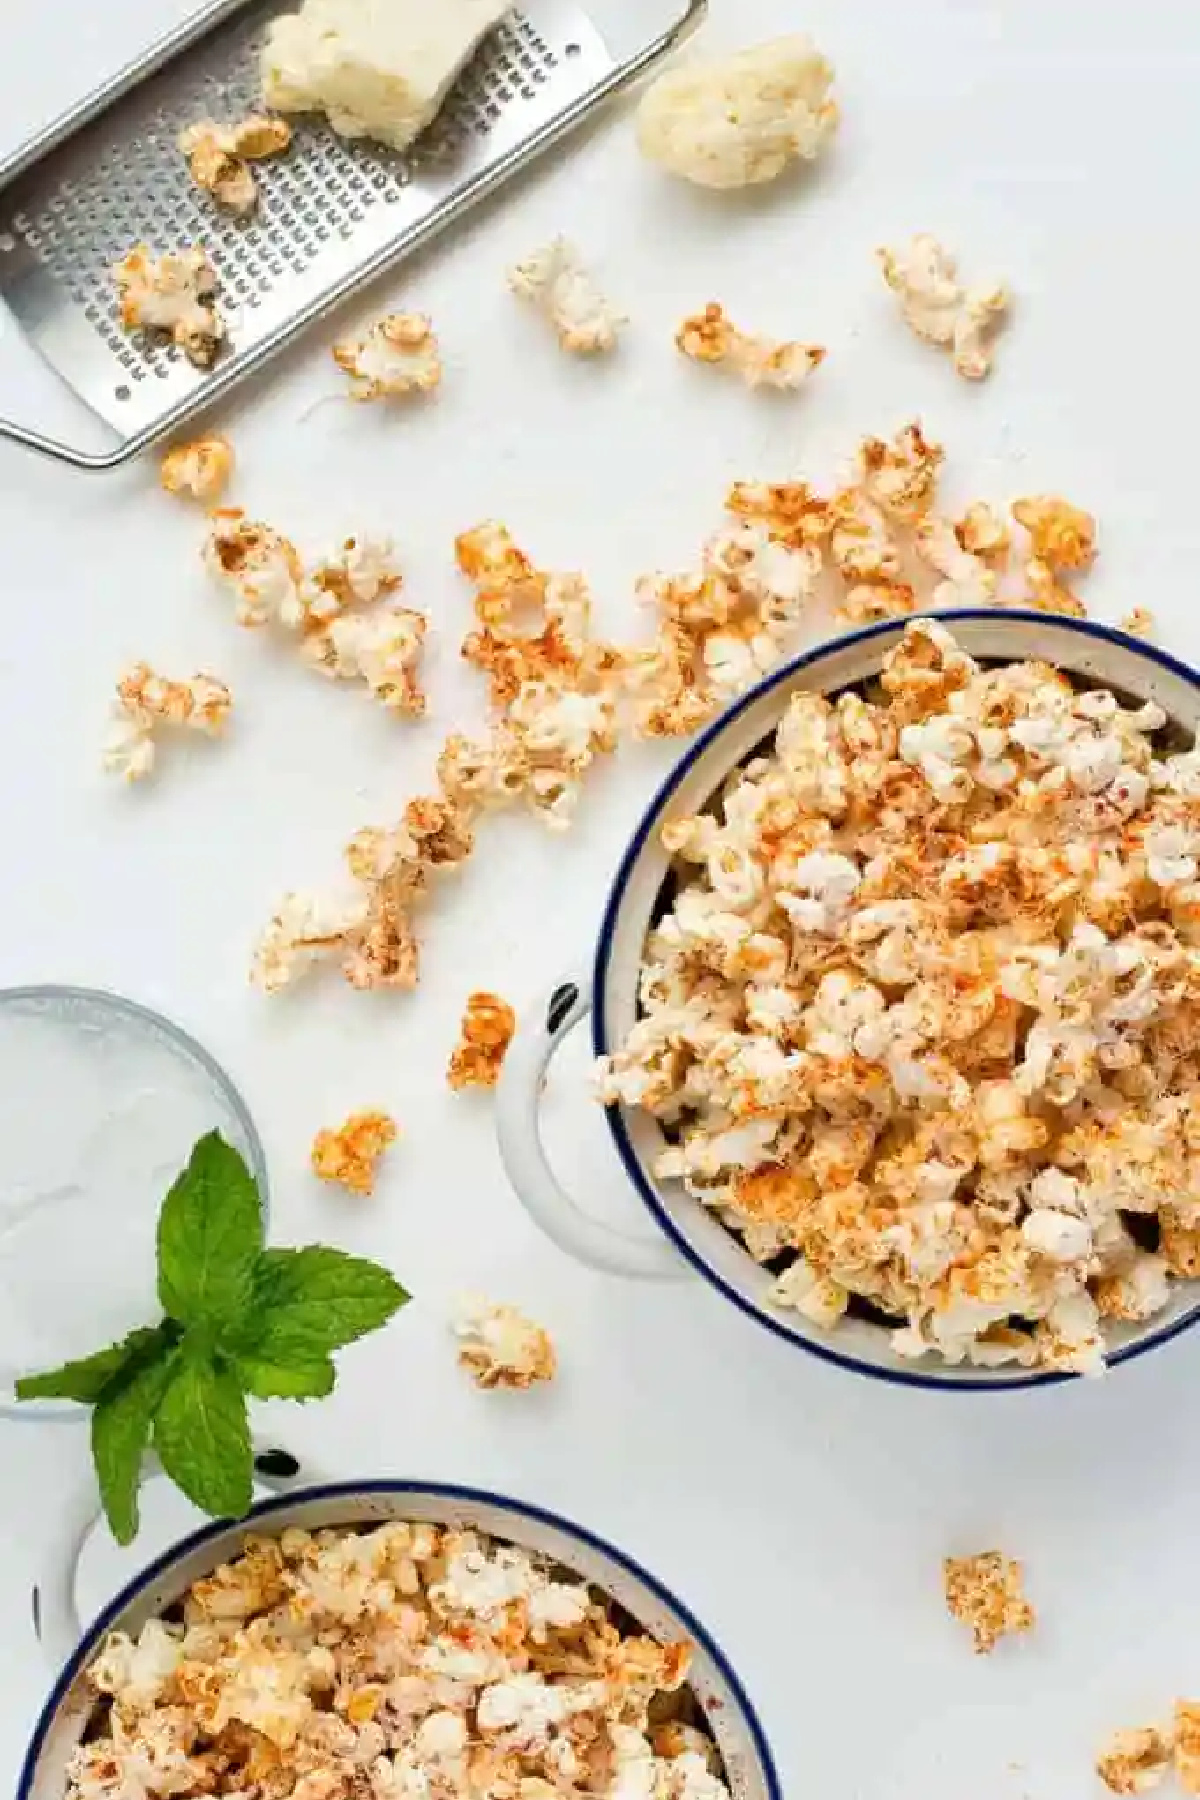 Cheap Party Food Ideas - Spicy Parmesan Popcorn